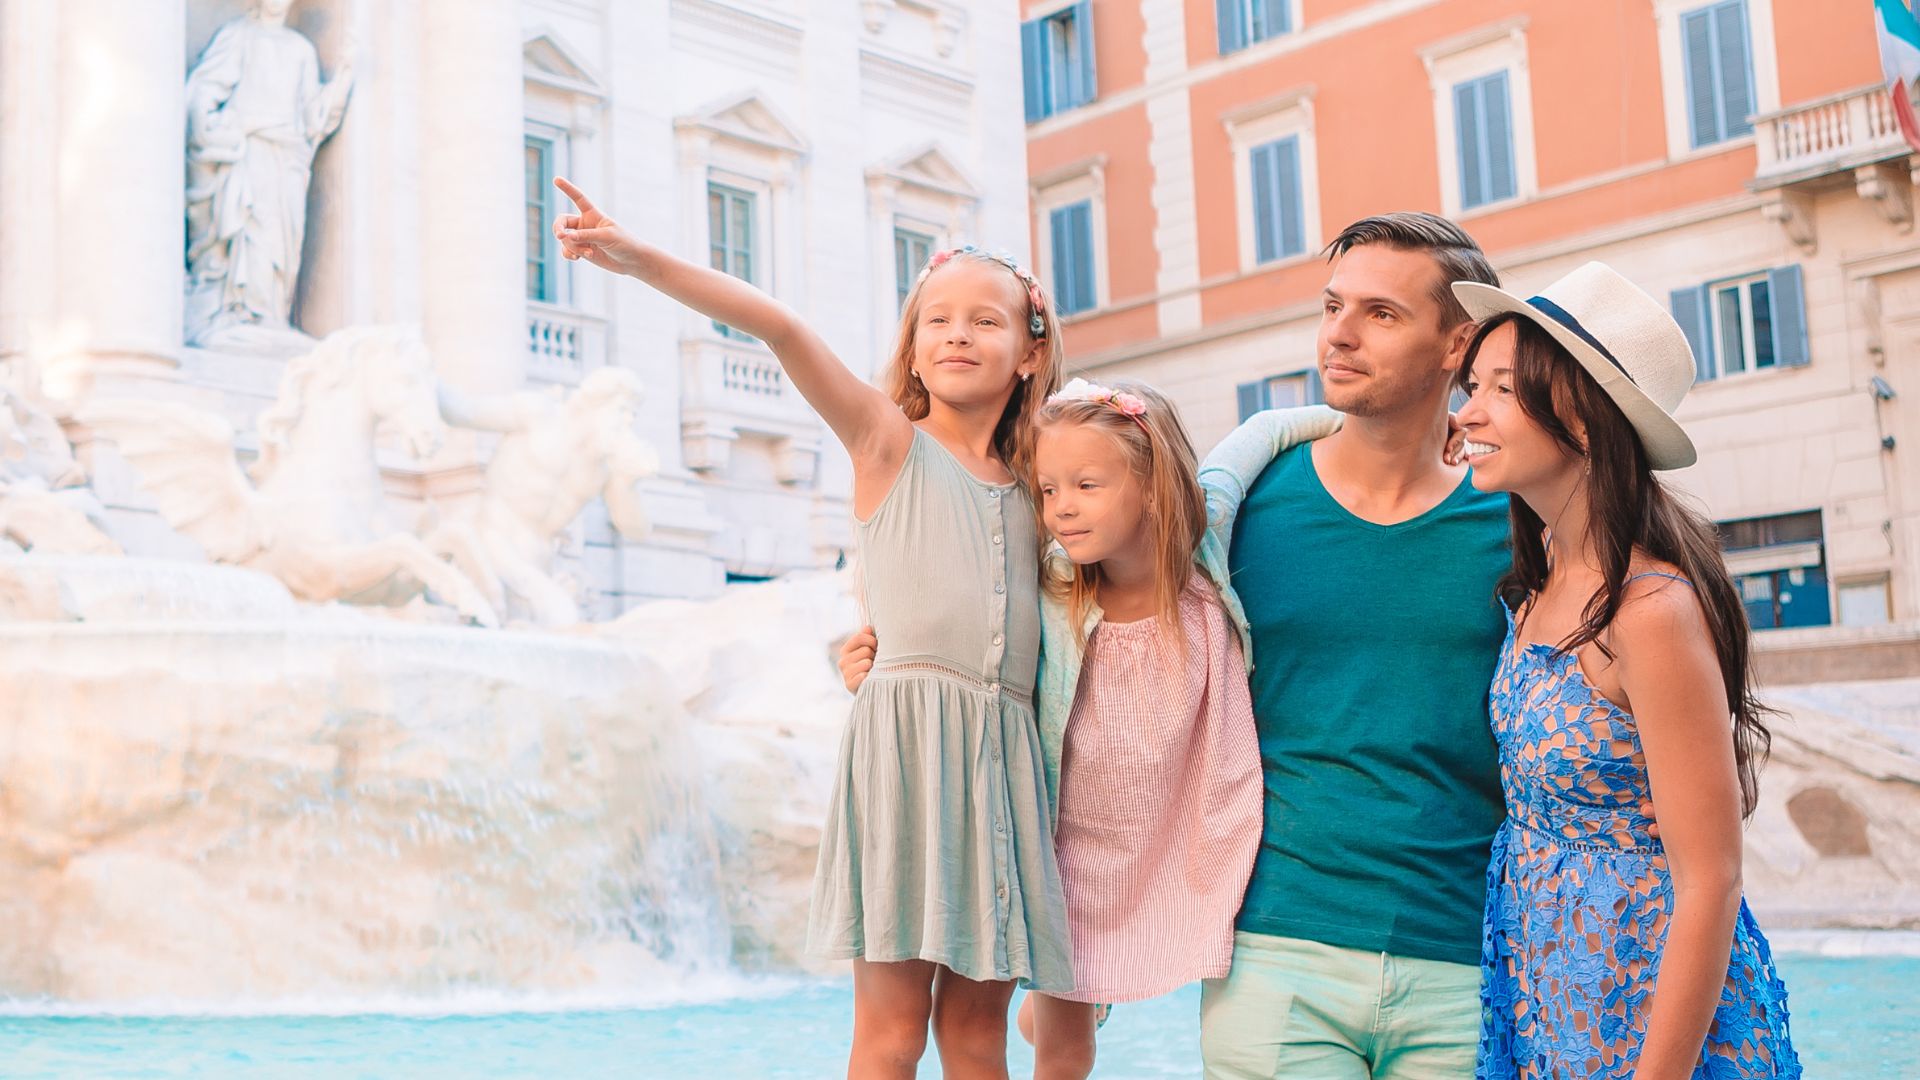 <p>Italy is a beautiful place to visit for families. However, the capital of Rome might not be the most suitable for kids. As tourism rises yearly in the city, it becomes increasingly chaotic and less ideal for children. From long lines to limited transportation, here are 14 reasons to bypass Rome for a family vacation and head somewhere else instead. </p>